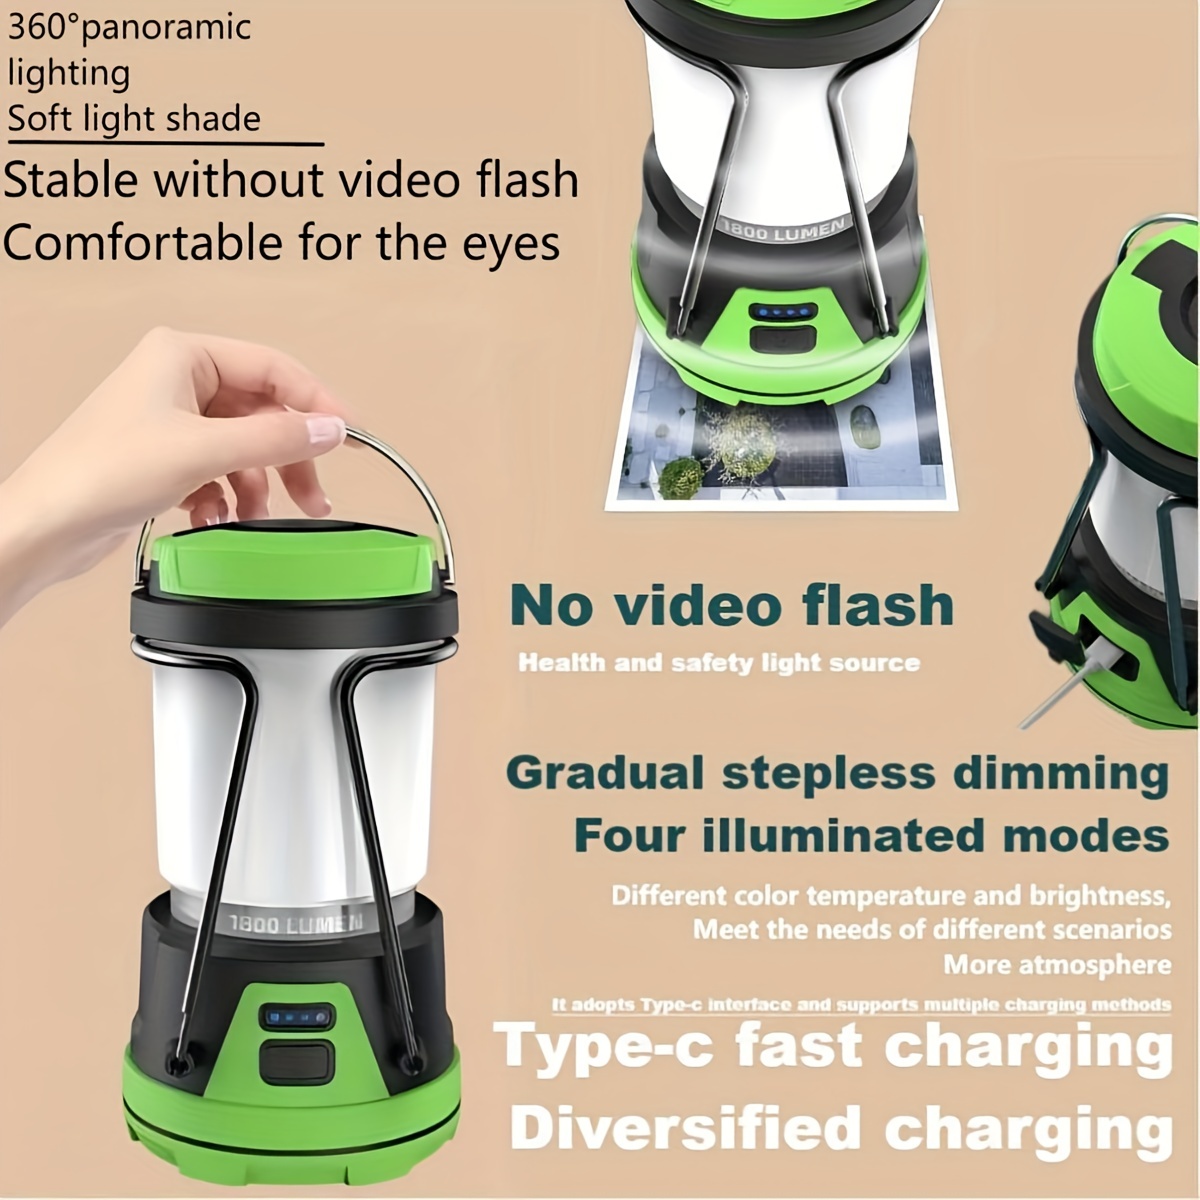 Retro LED Camping Lantern Rechargeable Tent Lights, Power Bank